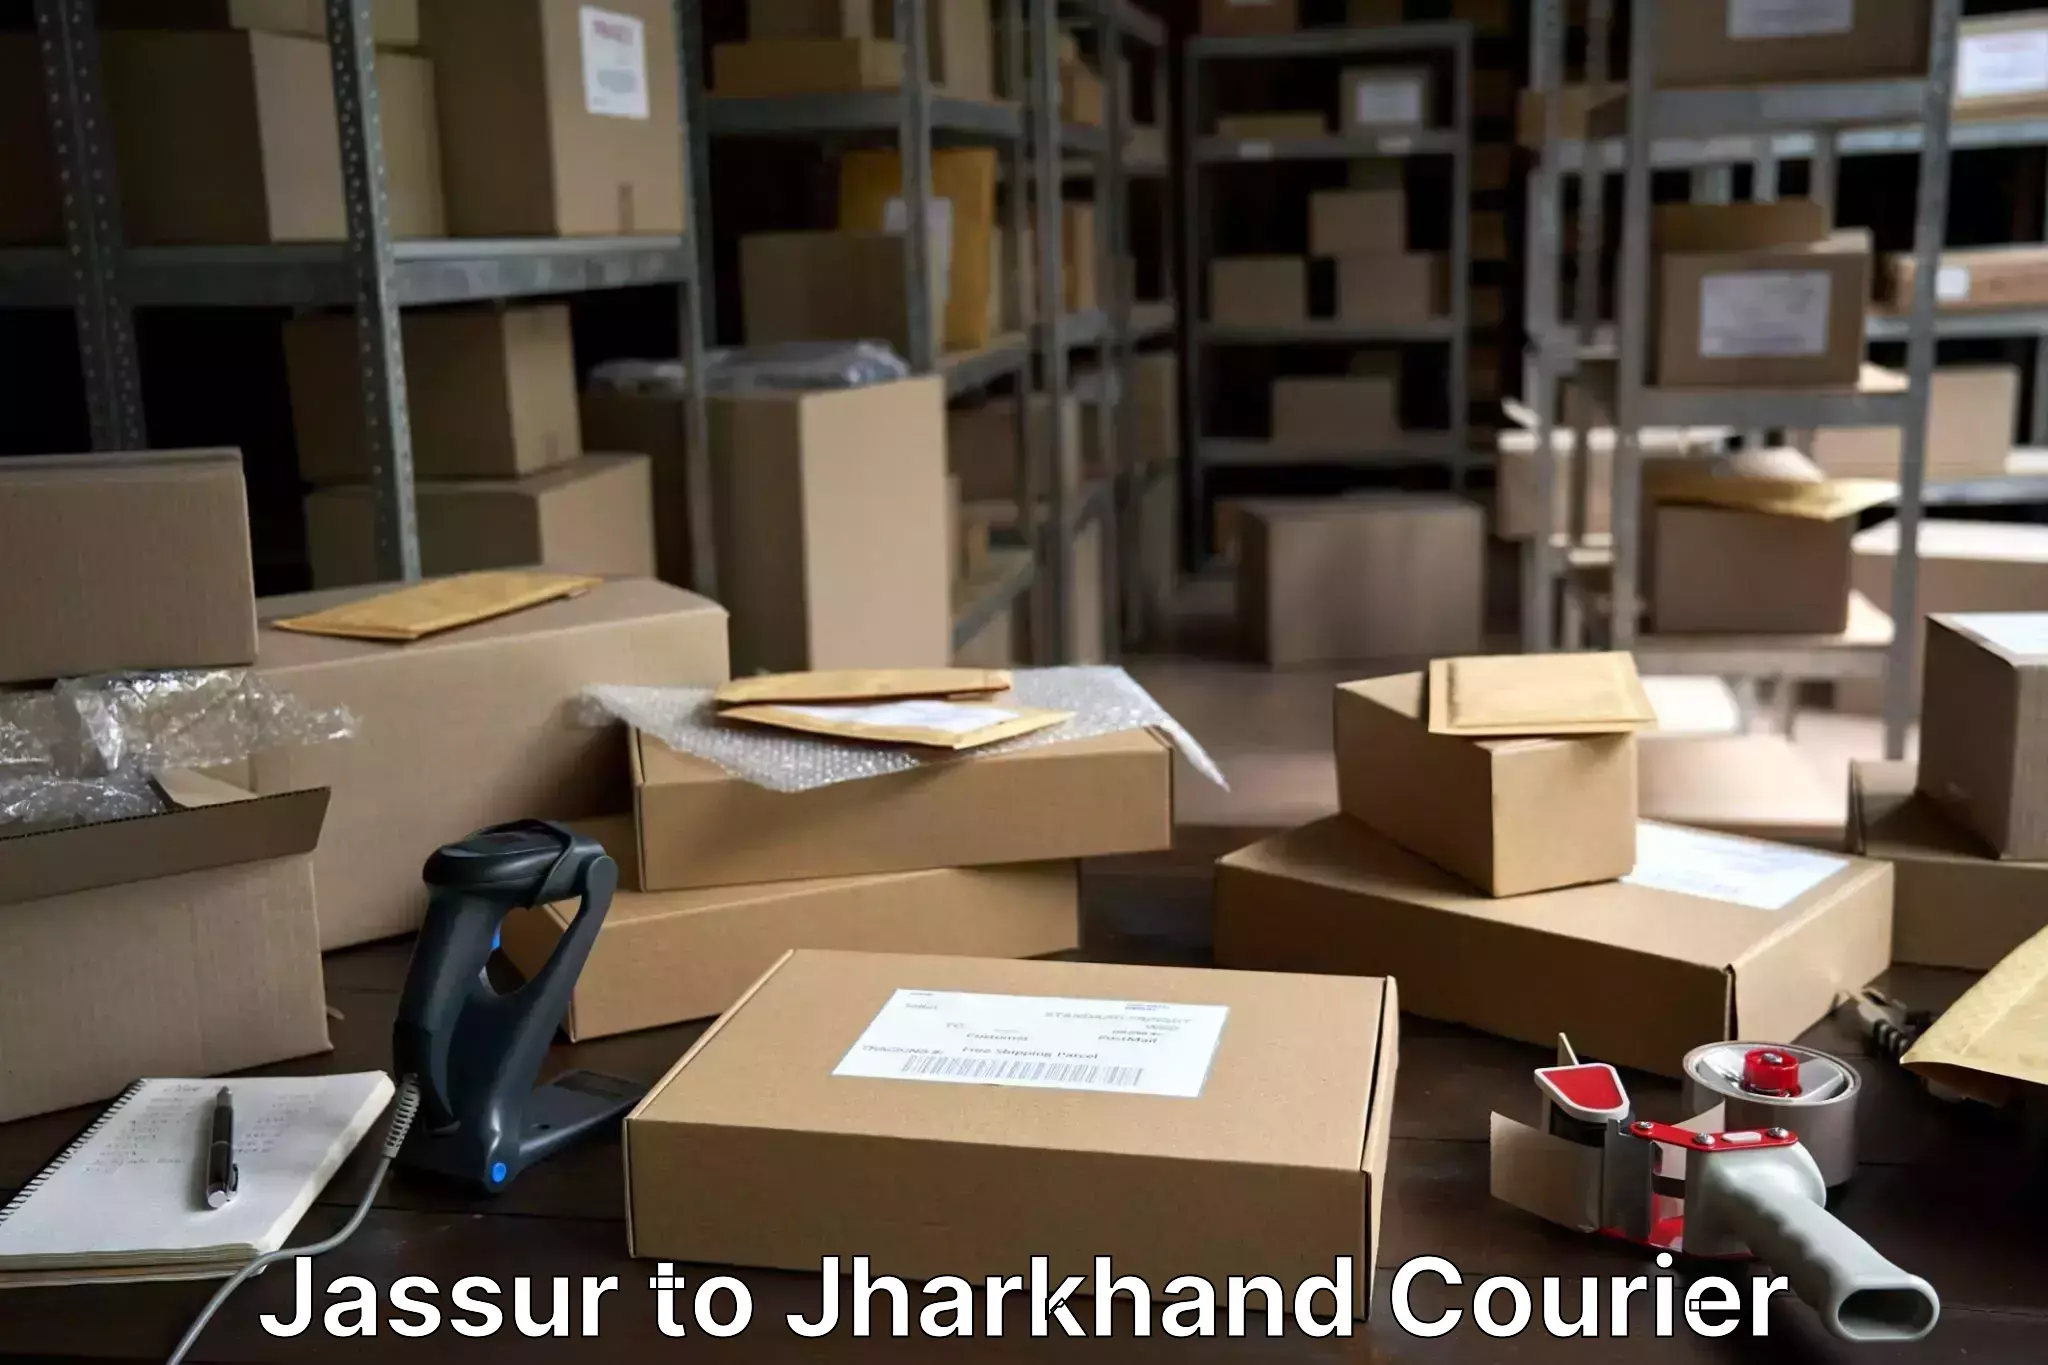 Instant baggage transport quote Jassur to Jharkhand